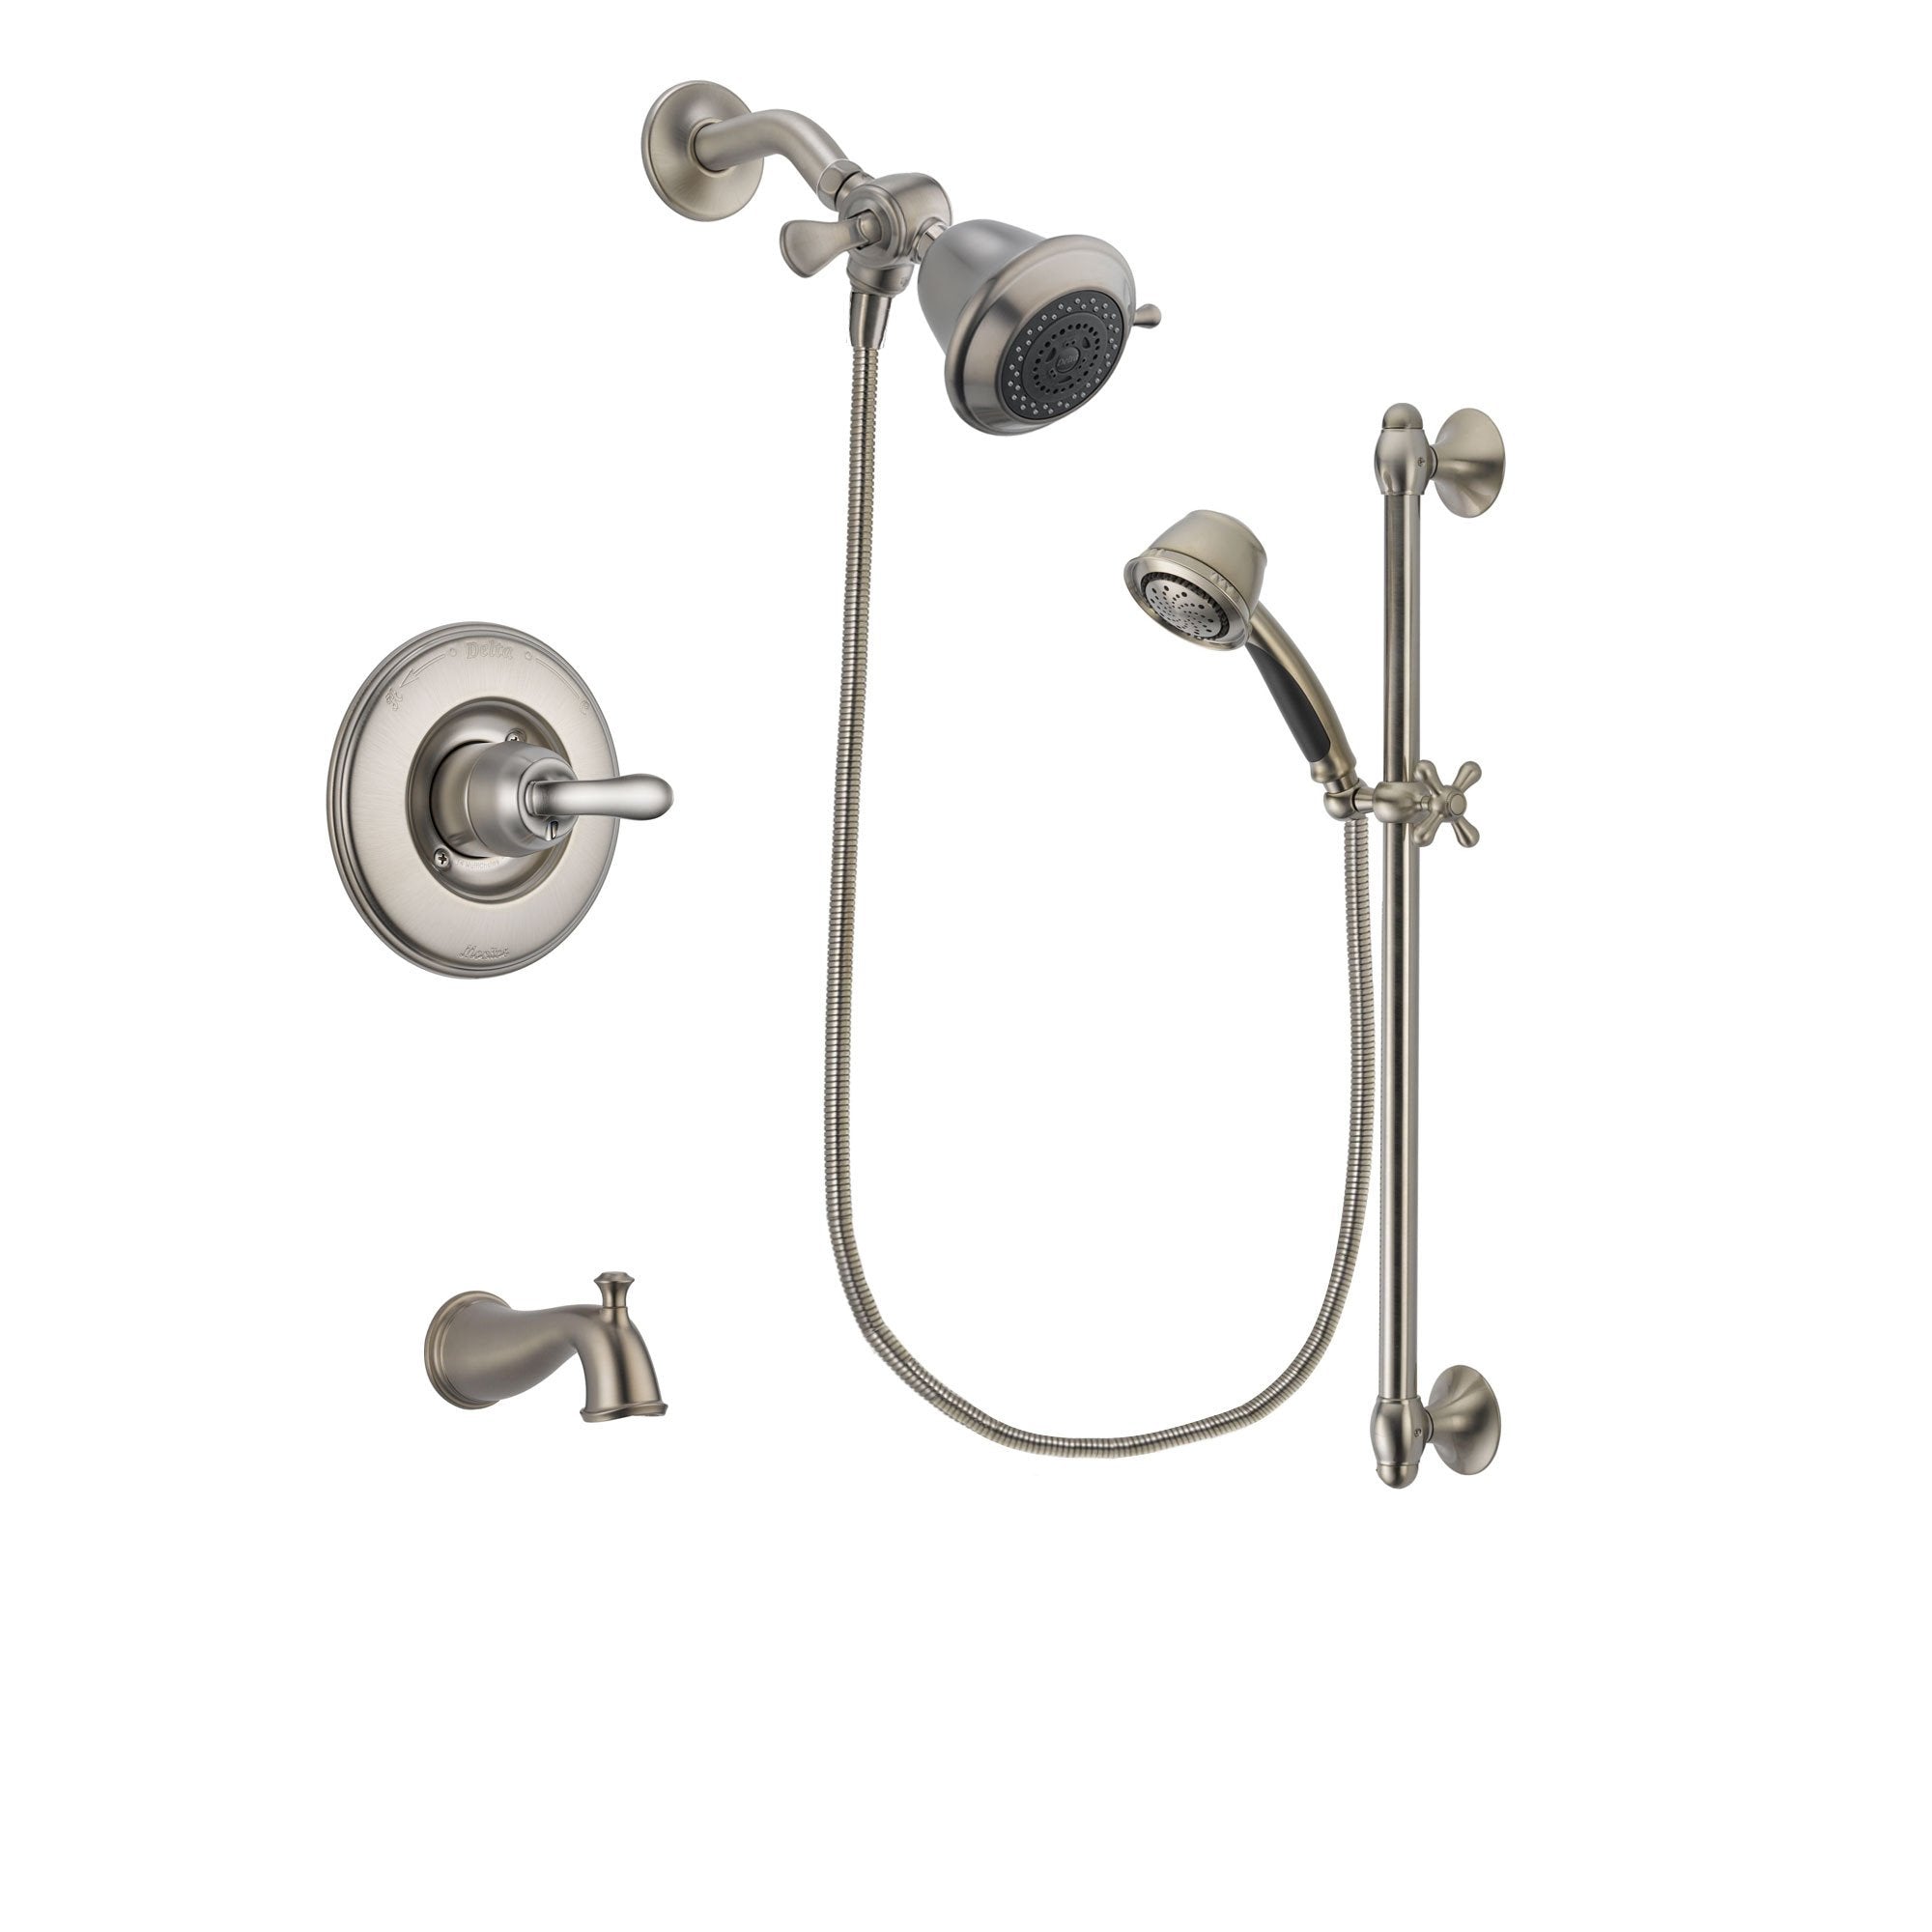 Delta Linden Stainless Steel Finish Tub and Shower Faucet System Package with Shower Head and 5-Spray Personal Handshower with Slide Bar Includes Rough-in Valve and Tub Spout DSP1259V